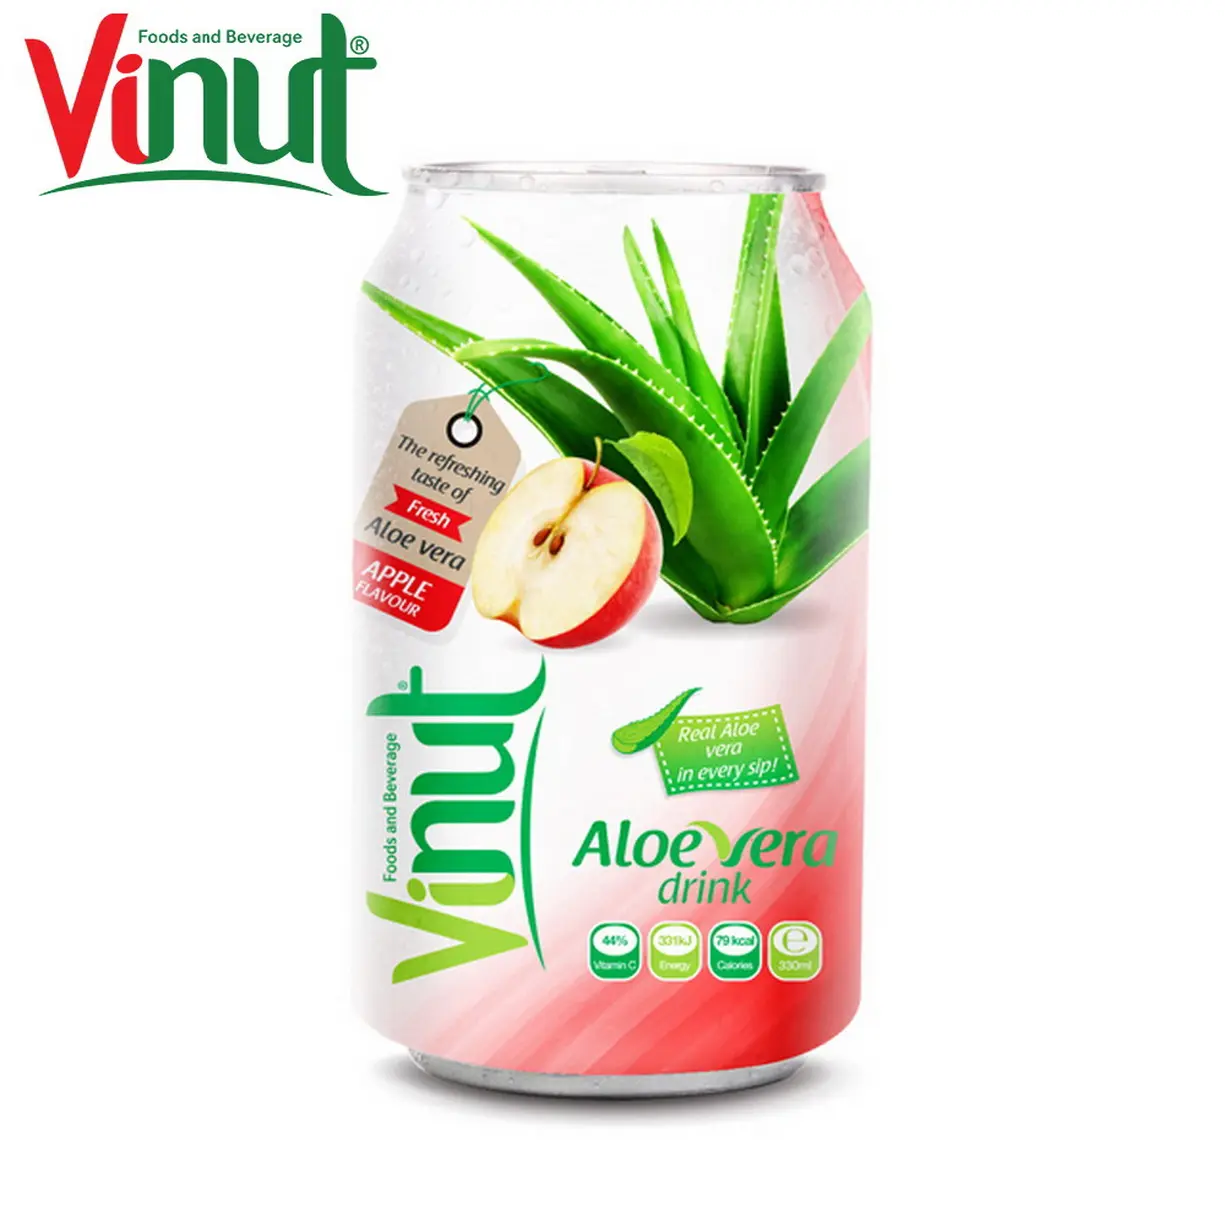 330ml VINUT Canned Apple Juice Aloe vera drink Suppliers Free Design Your Own Private Label Healthy tropical ISO Certificate